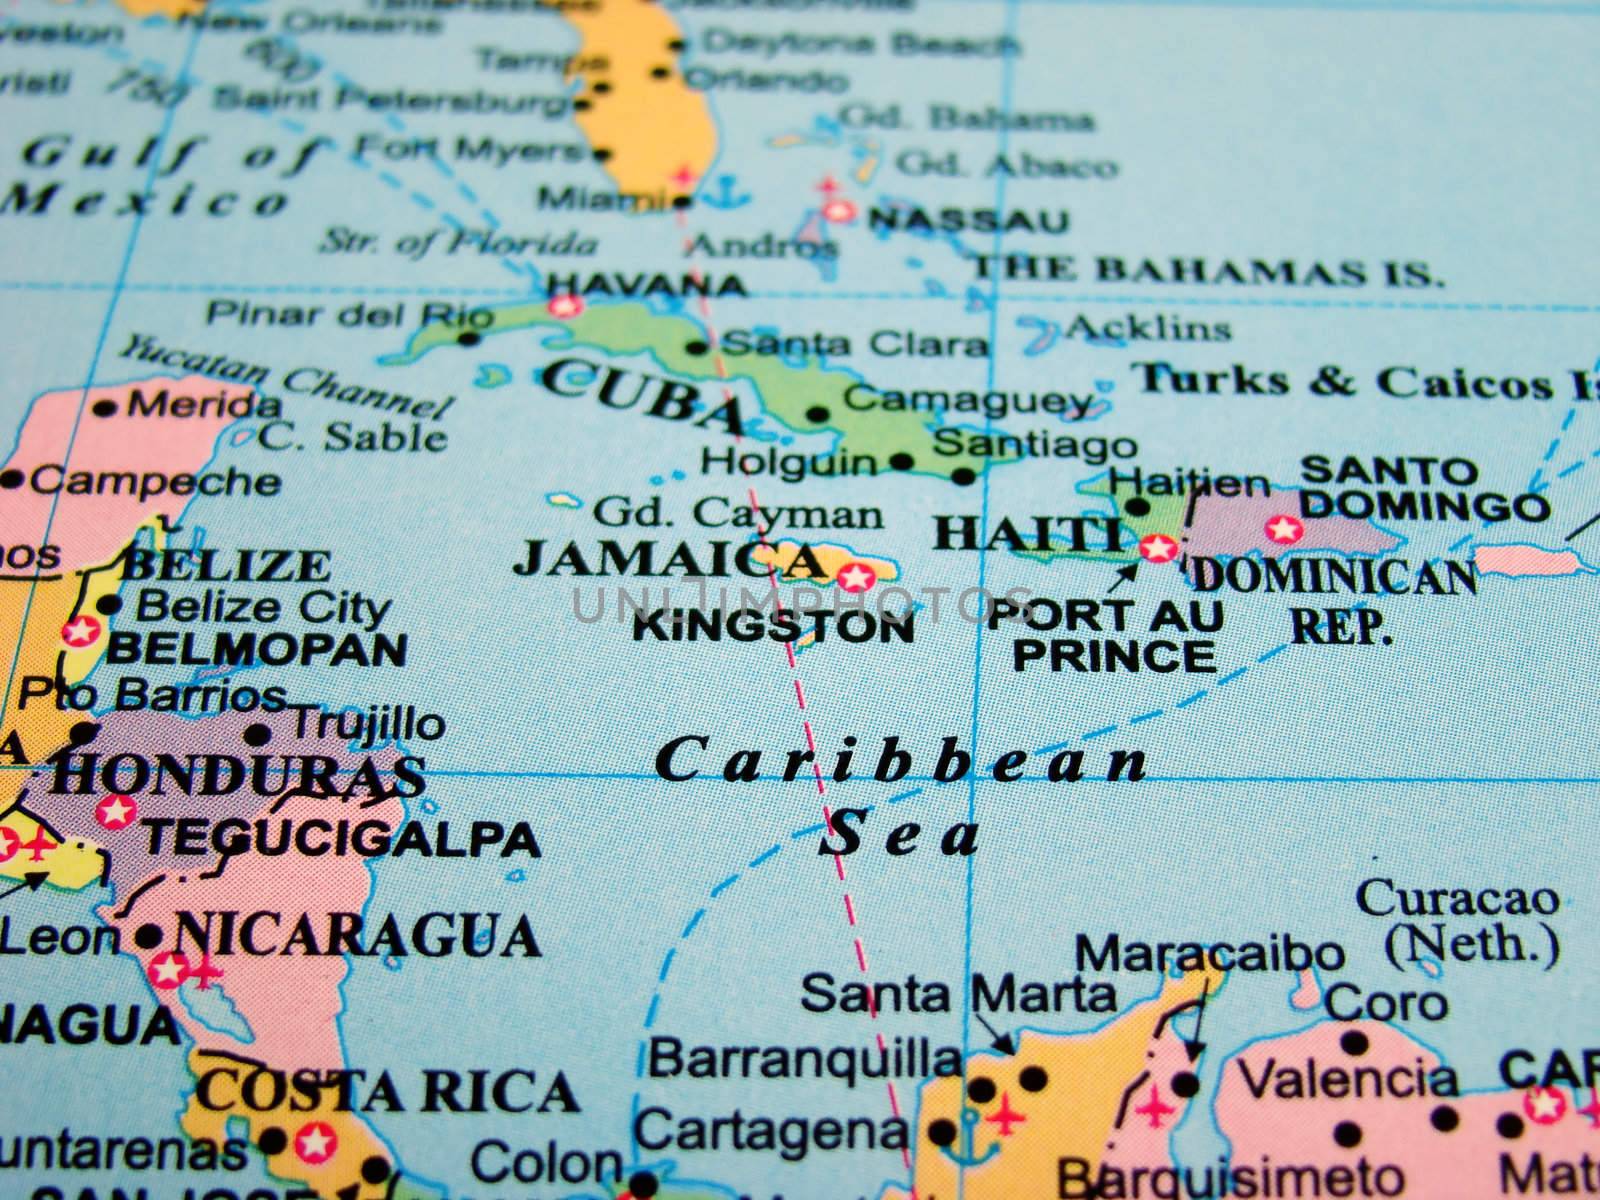 Map of the Caribbean Sea and Central America countries.